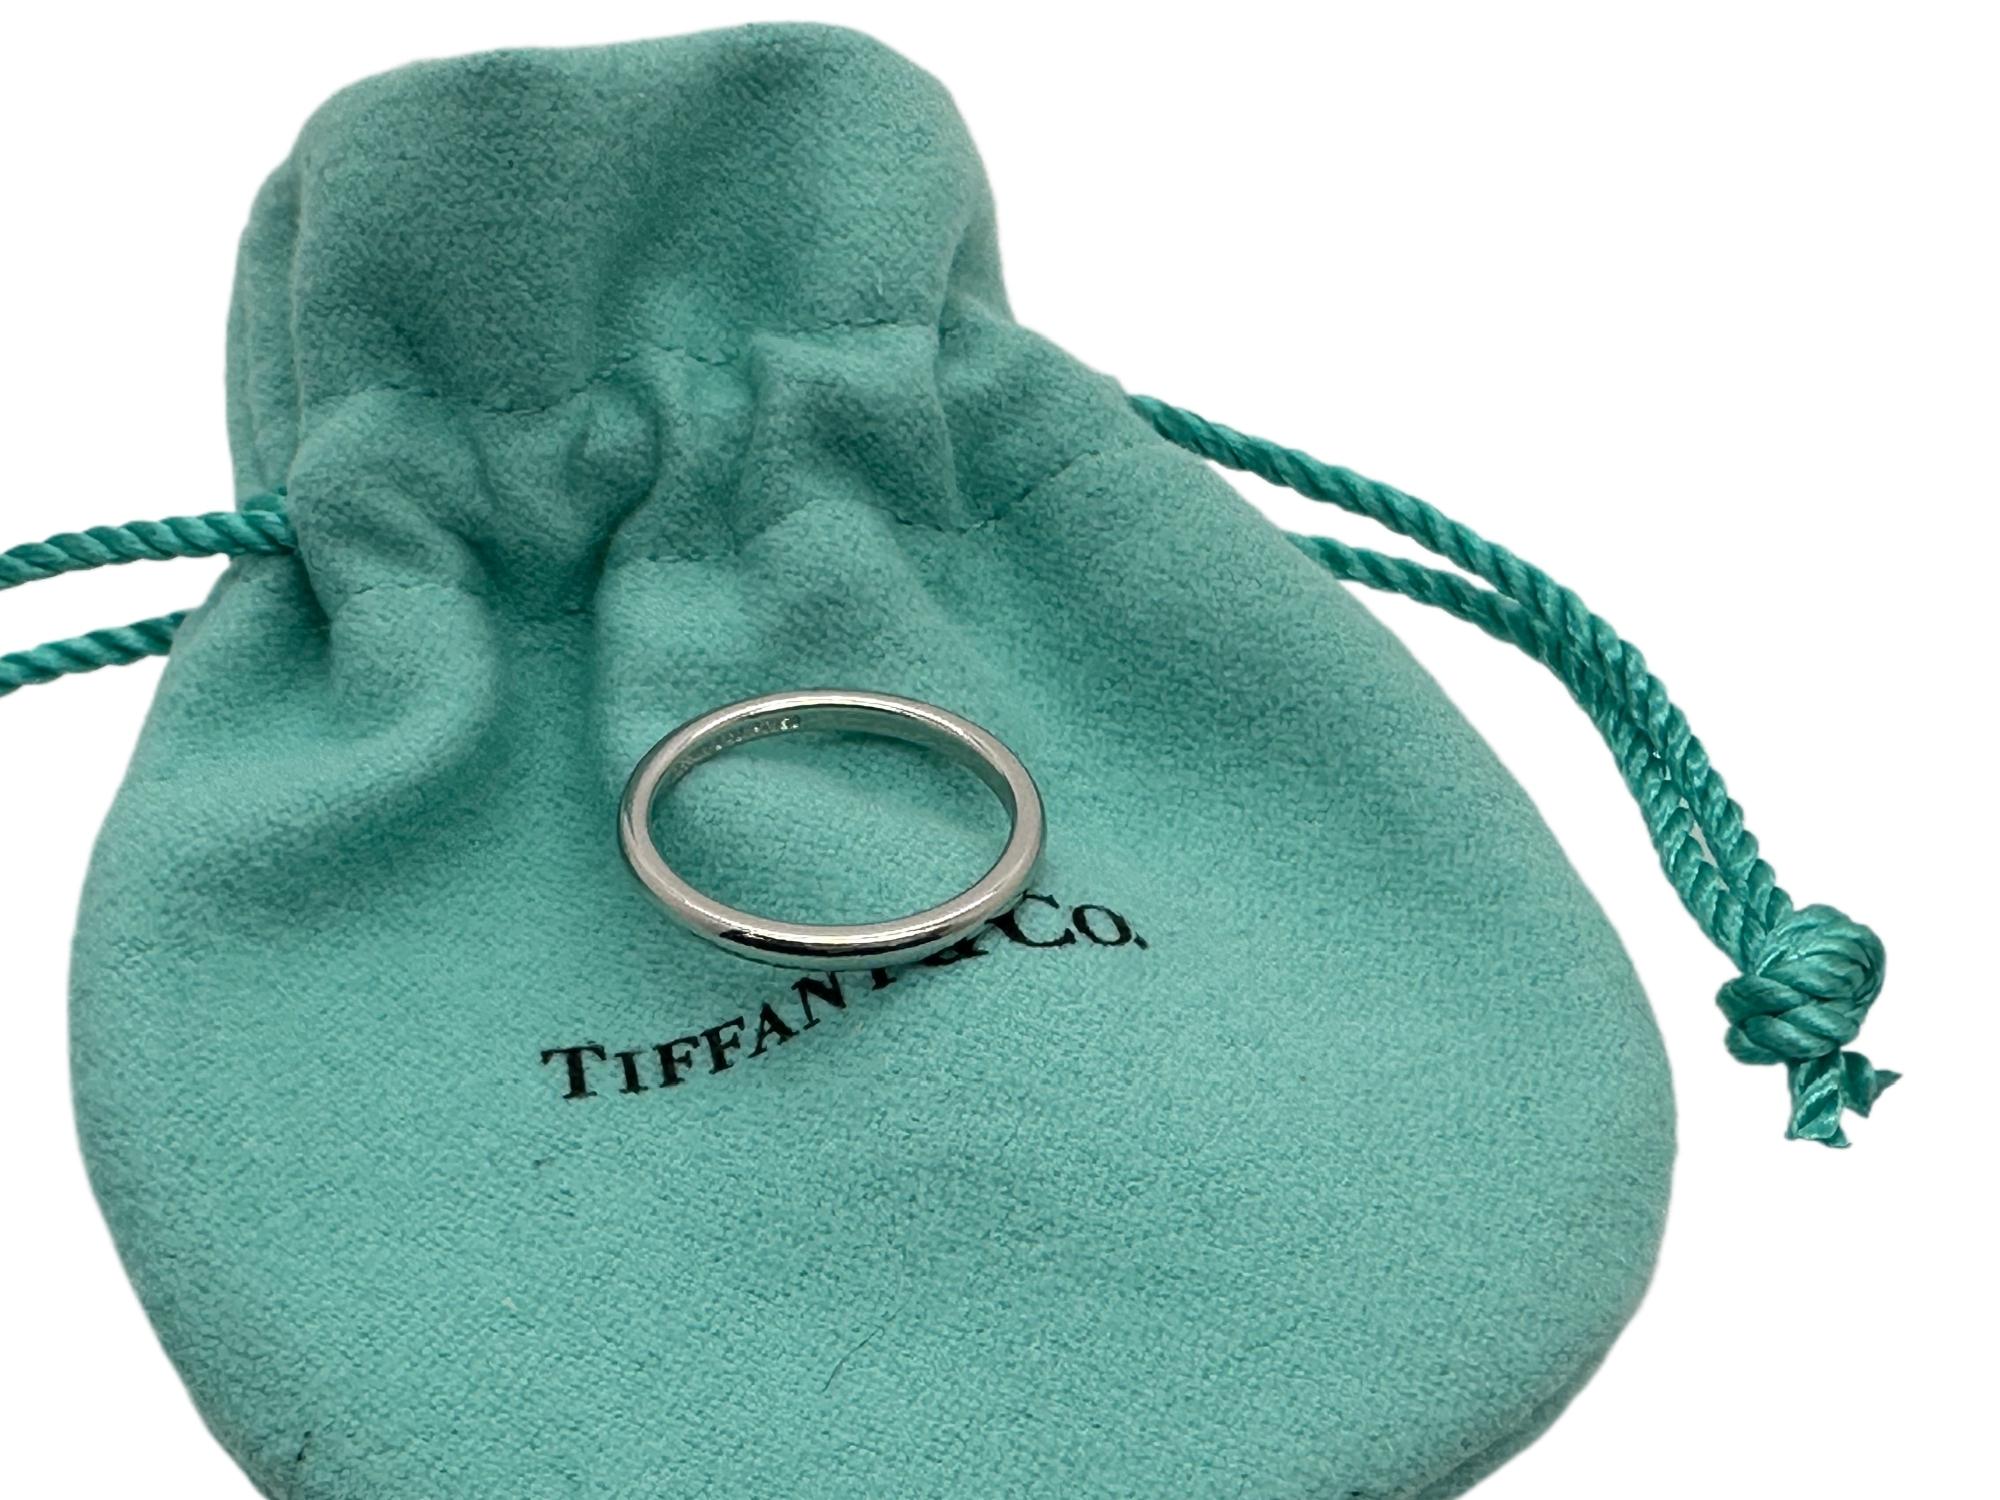 Tiffany & Co. Forever Wedding Band Ring 2 mm Platinum In Good Condition For Sale In San Diego, CA